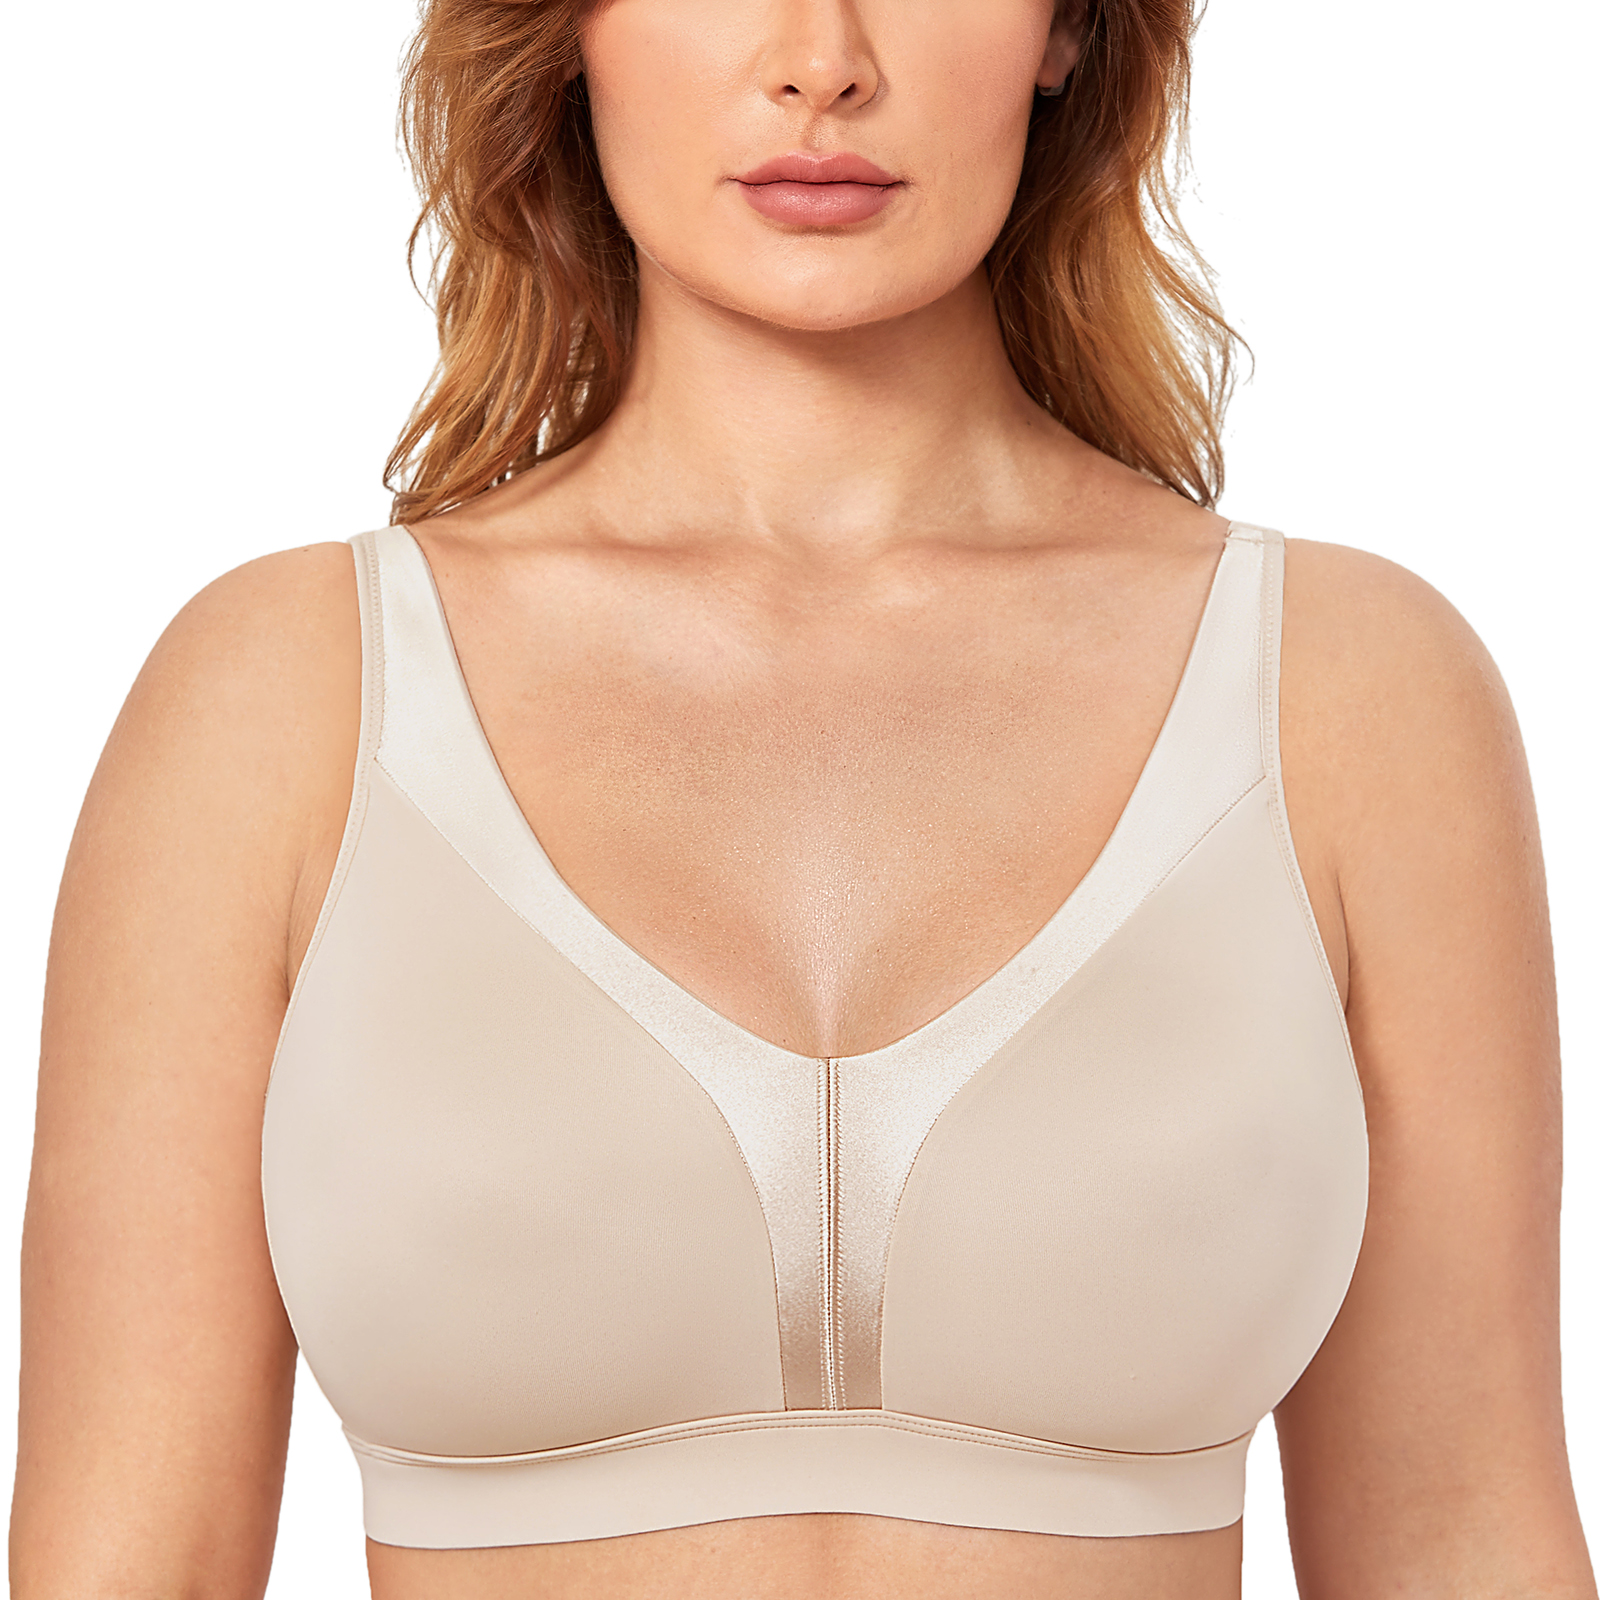 Full Coverage Underwire Bras Plus Size Women Butt Lifter Padded